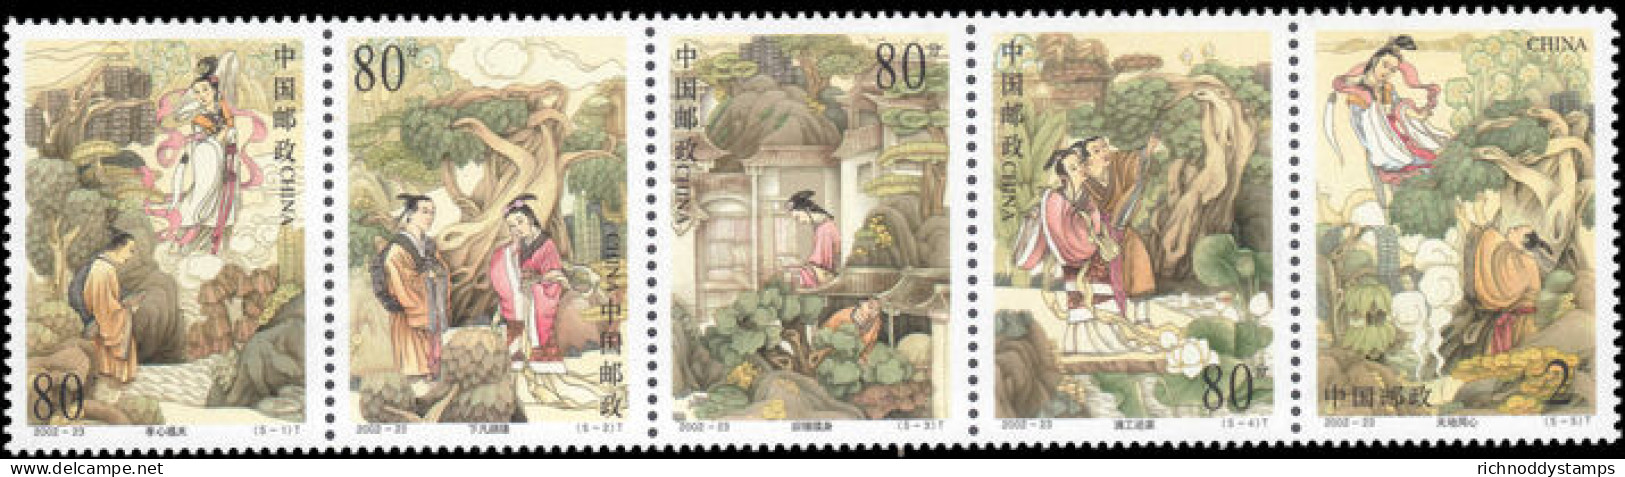 Peoples Republic Of China 2002 Tale Of Dong Yong And The Seventh Immortal Maiden Unmounted Mint. - Unused Stamps